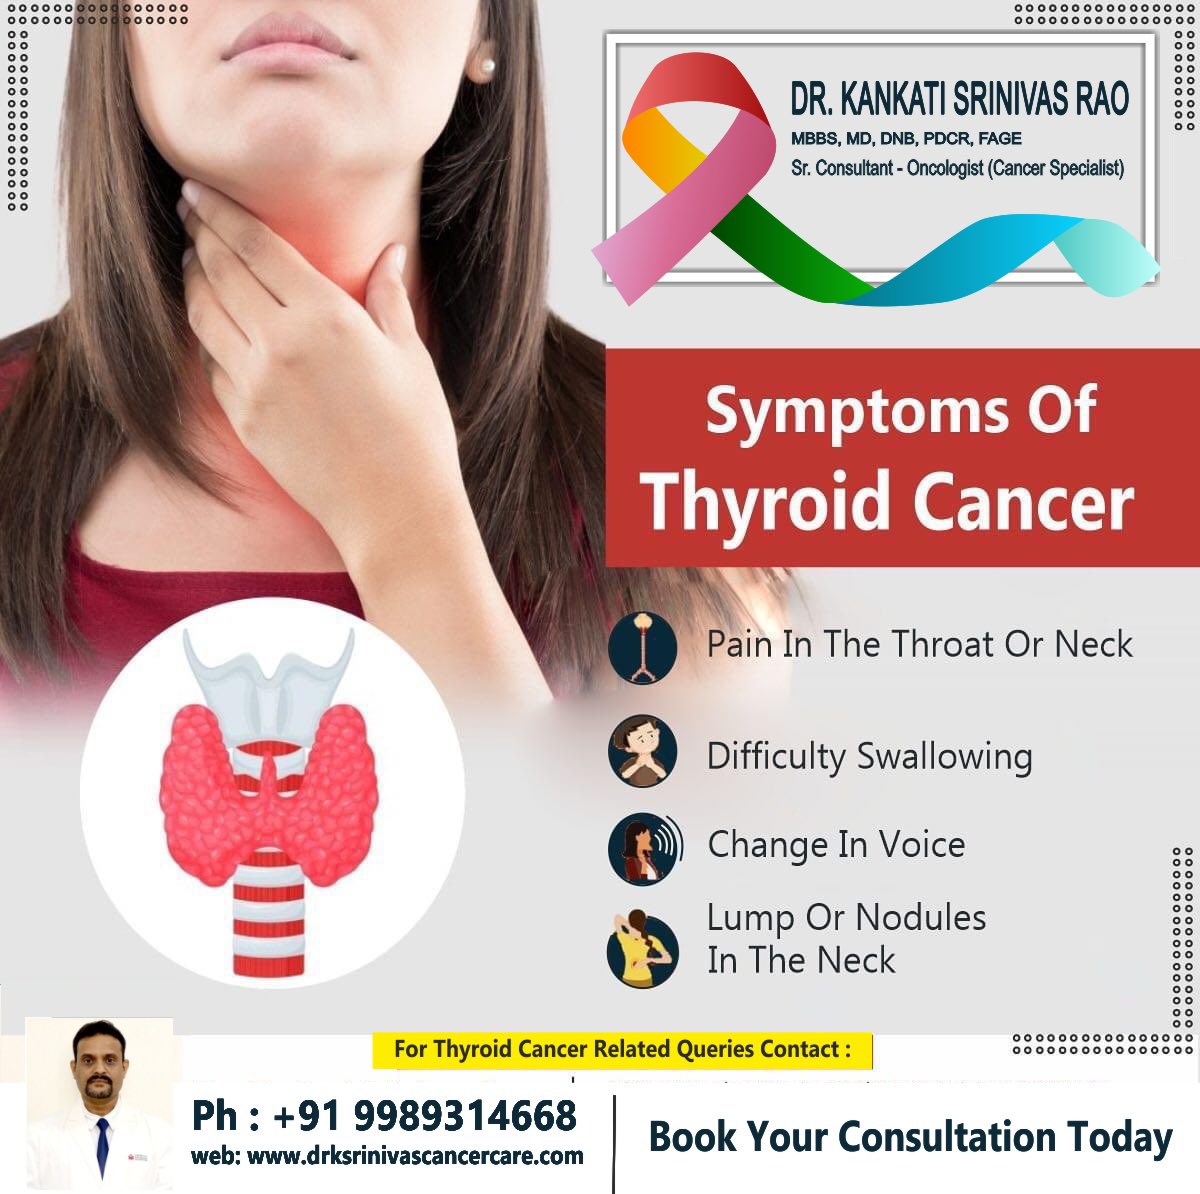 *SYMPTOMS OF THYROID CANCER* #Drkankatisrinivasrao #thyroidcancersurvivor #thyroidcancer #thyroidcancertreatment #radiation #thyroidcancersymptoms #thyroidcancerawareness #chemotherapy #immunotherapy #radiotherapy #oncologist #cancer #nalagandla #hyderabad #hitechcity